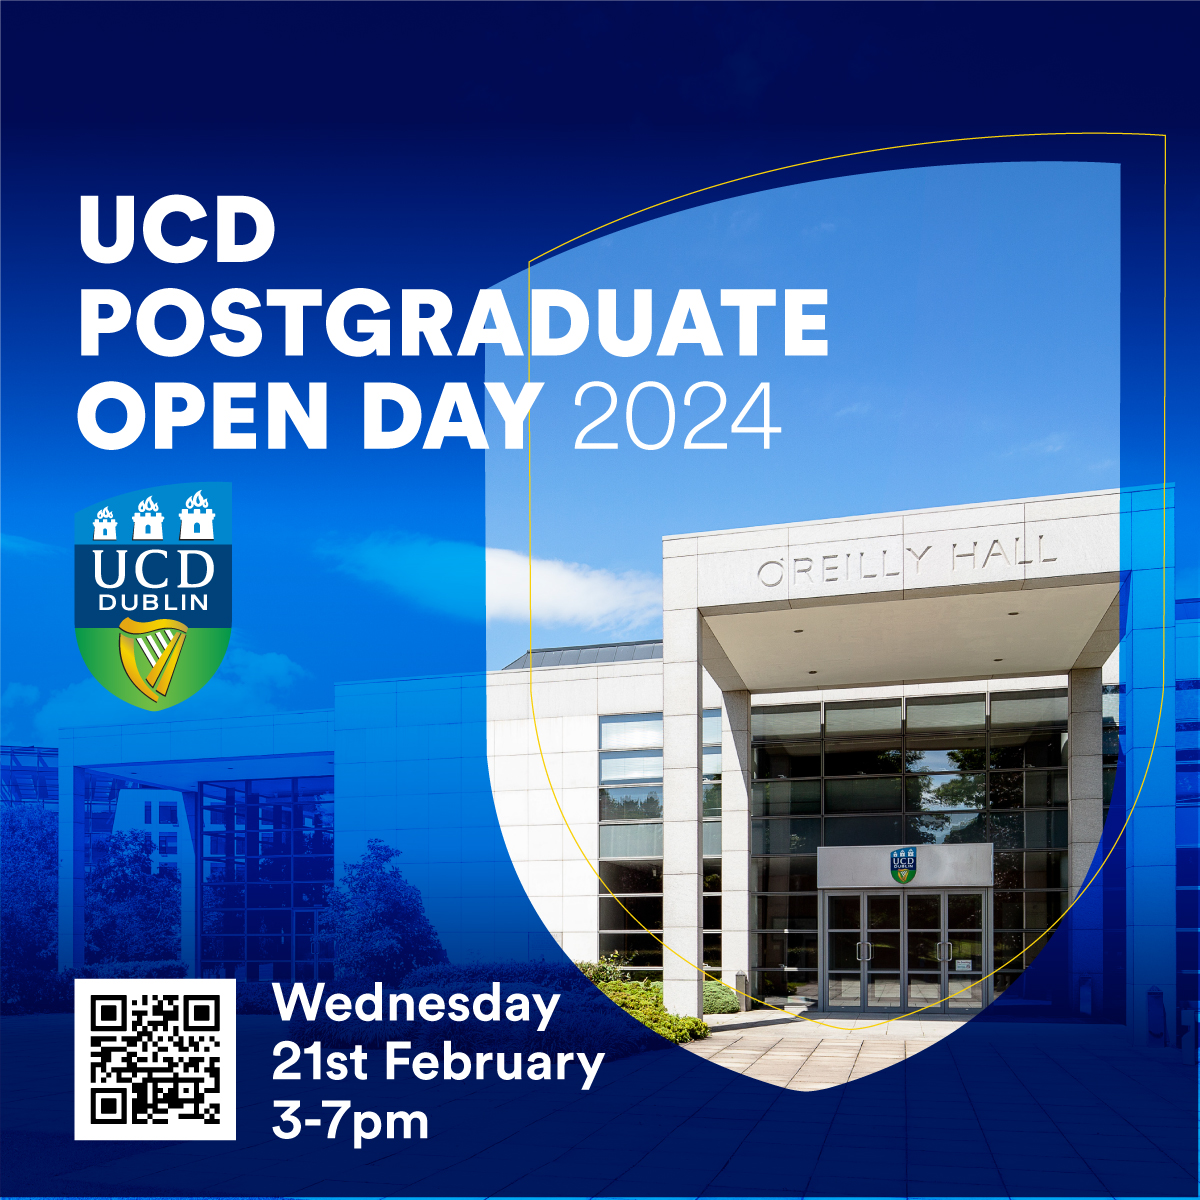 Join us at the UCD Postgraduate Open Day 21st Feb 3 - 7pm. Speak with our team to find out about our 50+ taught graduate nursing, midwifery and health systems courses. 📍O'Reilly Hall 🌐 Register bit.ly/48iM627